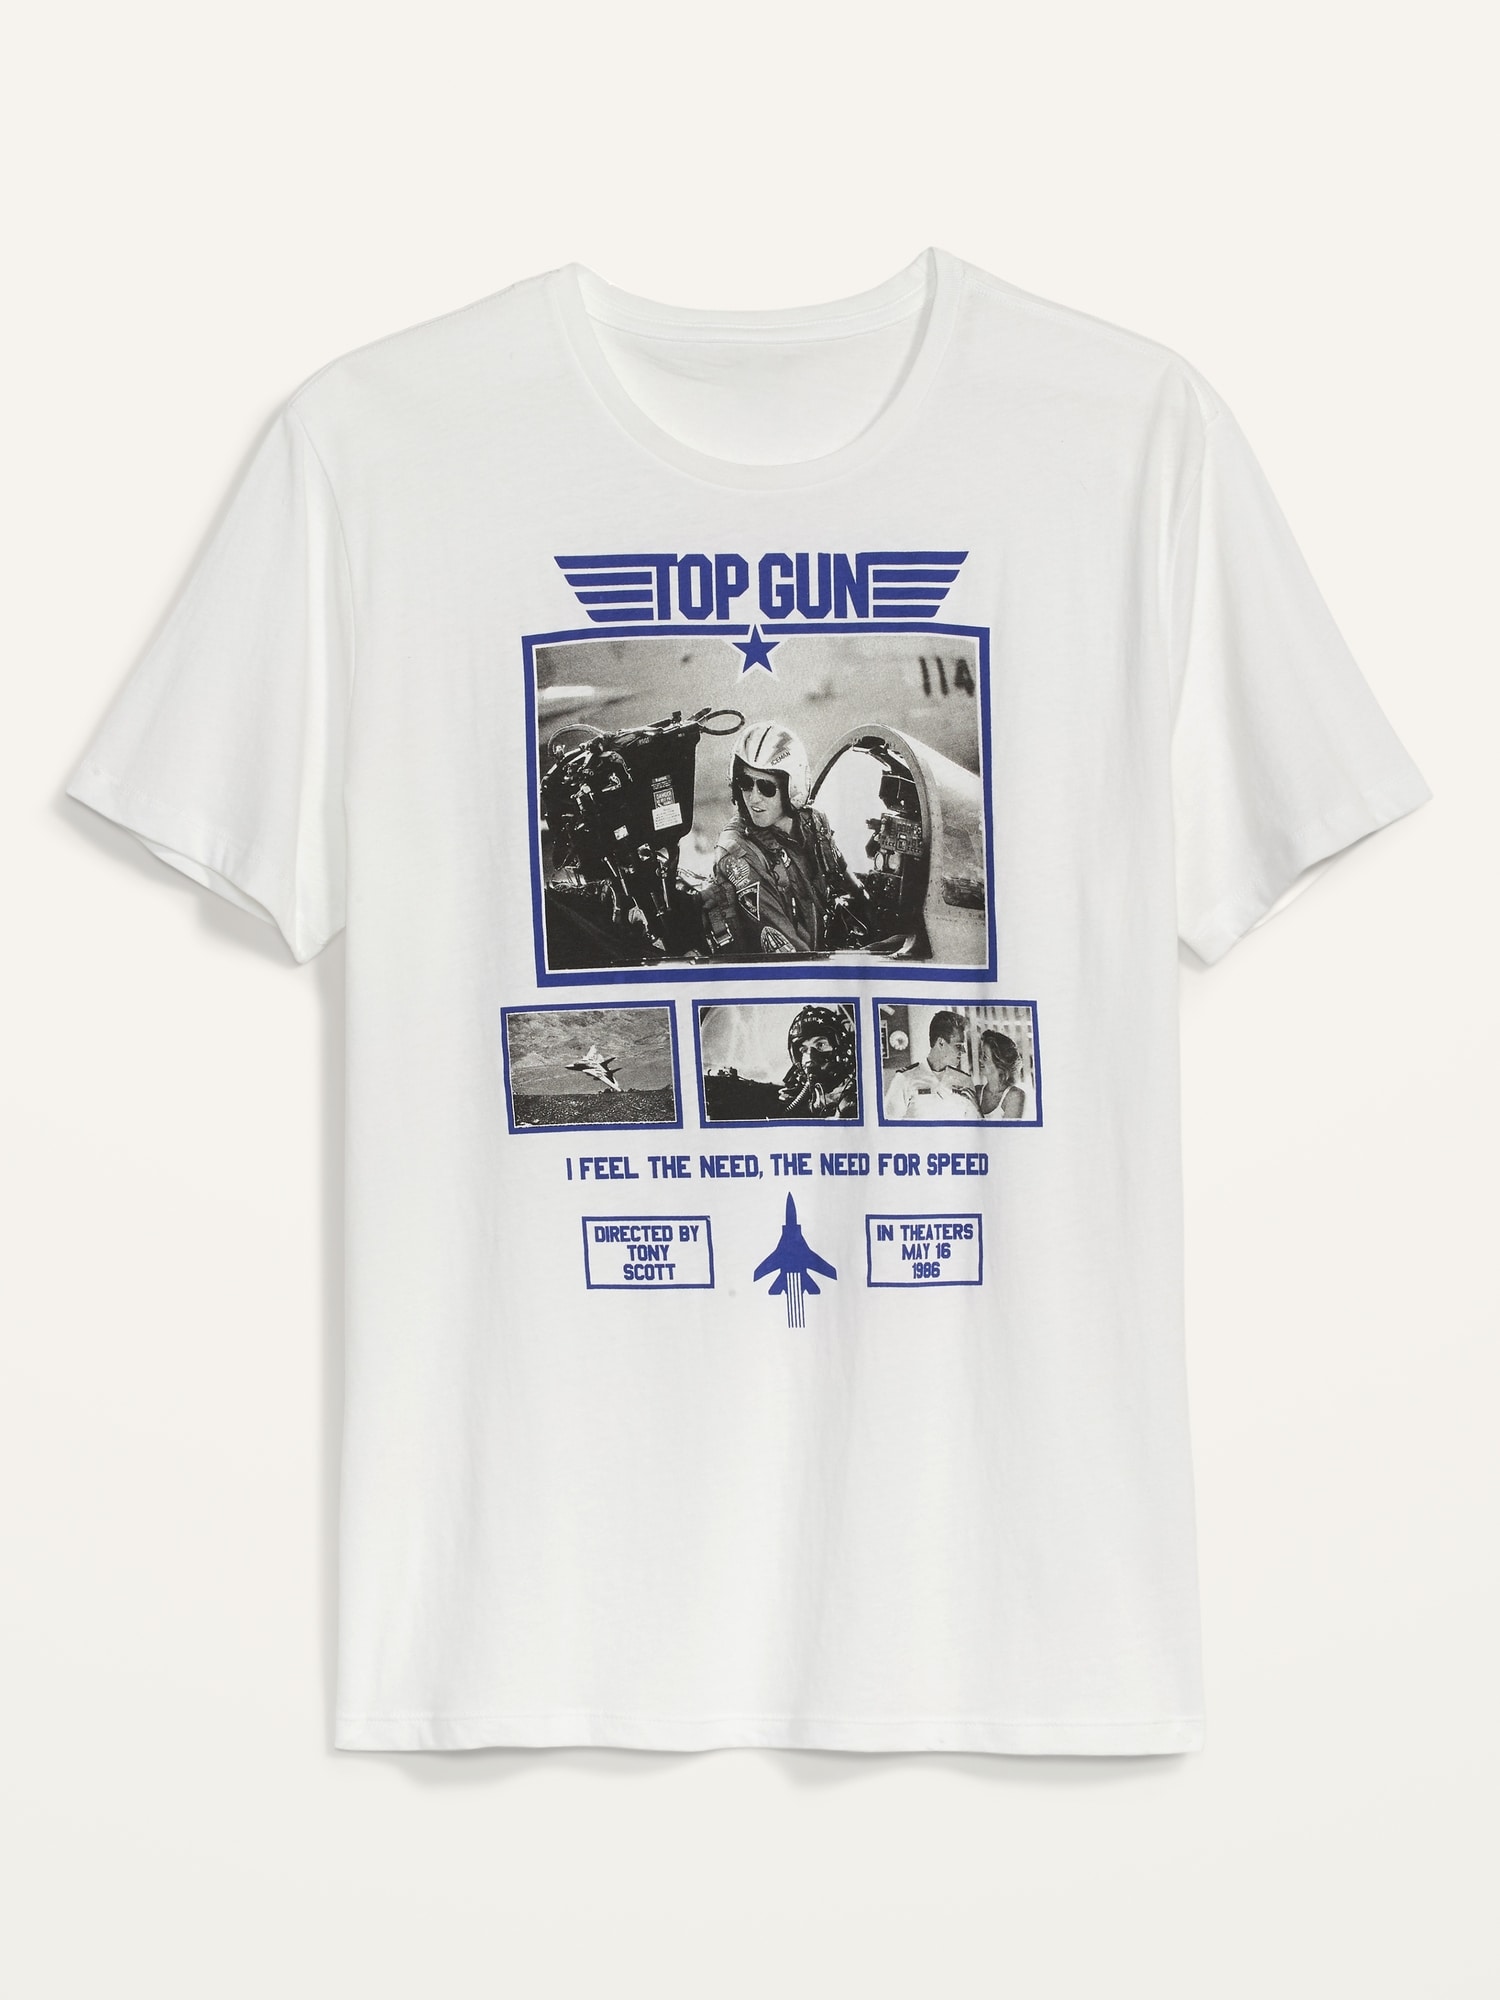 Top Gun™ Gender-Neutral Movie Graphic T-Shirt for Adults | Old Navy